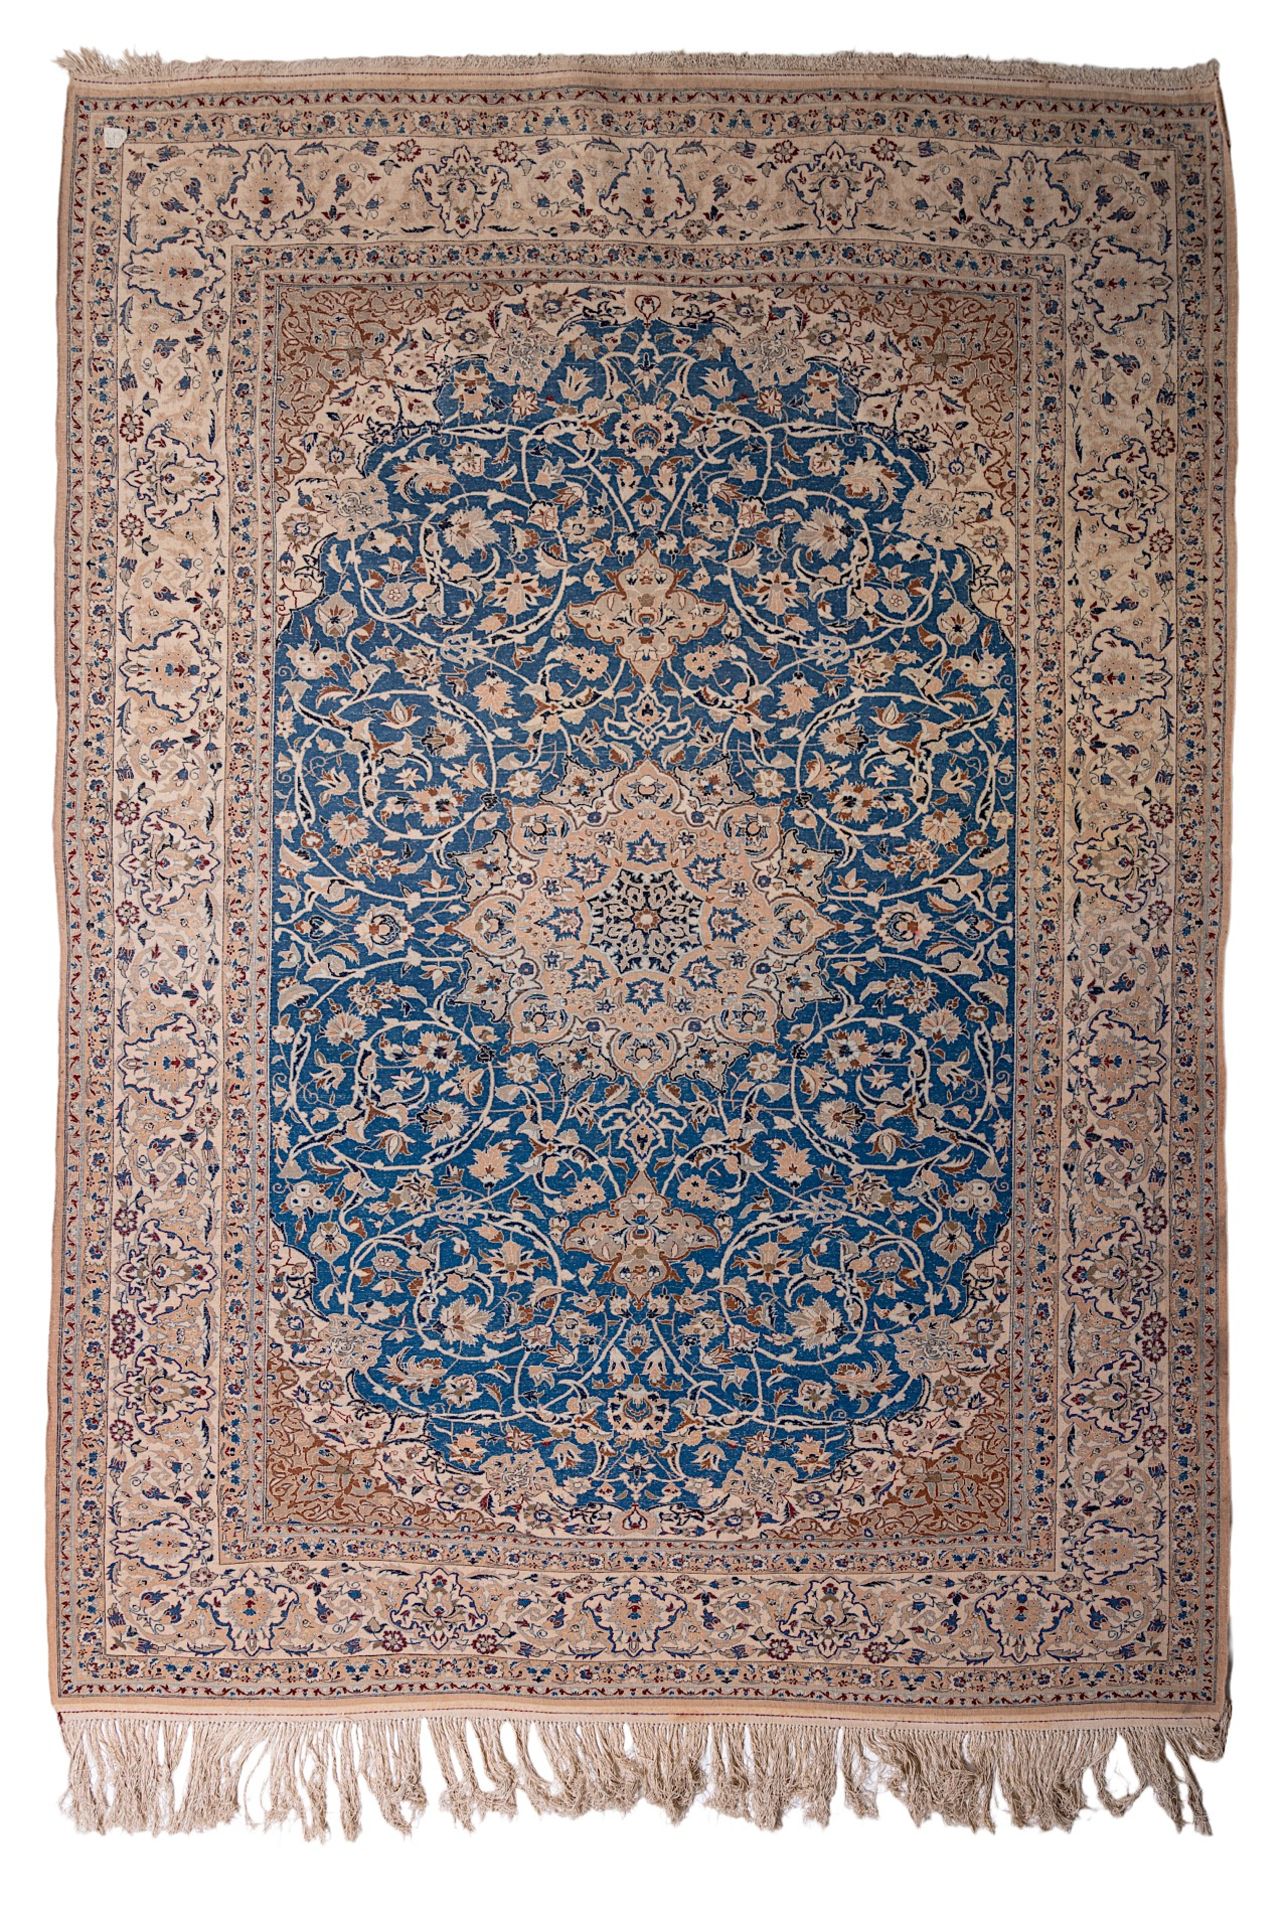 A Persian Nain woollen rug with a central medallion, 229 x 169 cm - Image 2 of 8